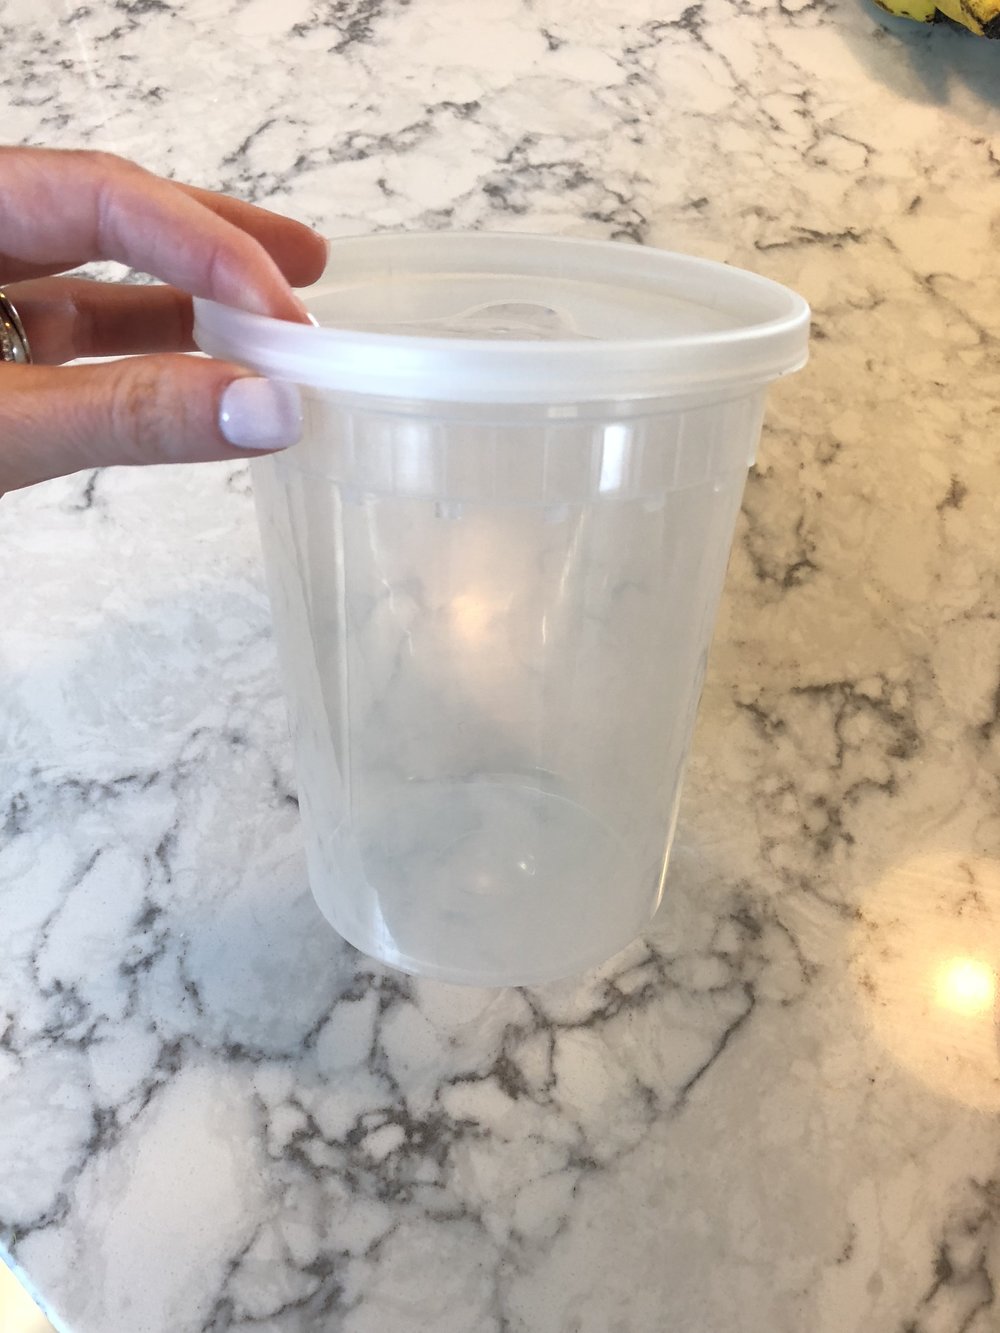 This is my "unique" size. I make a lot of soups and homemade stock and this is really the best container for large amounts of liquid. The lid seals tight and they stack nicely in the freezer.